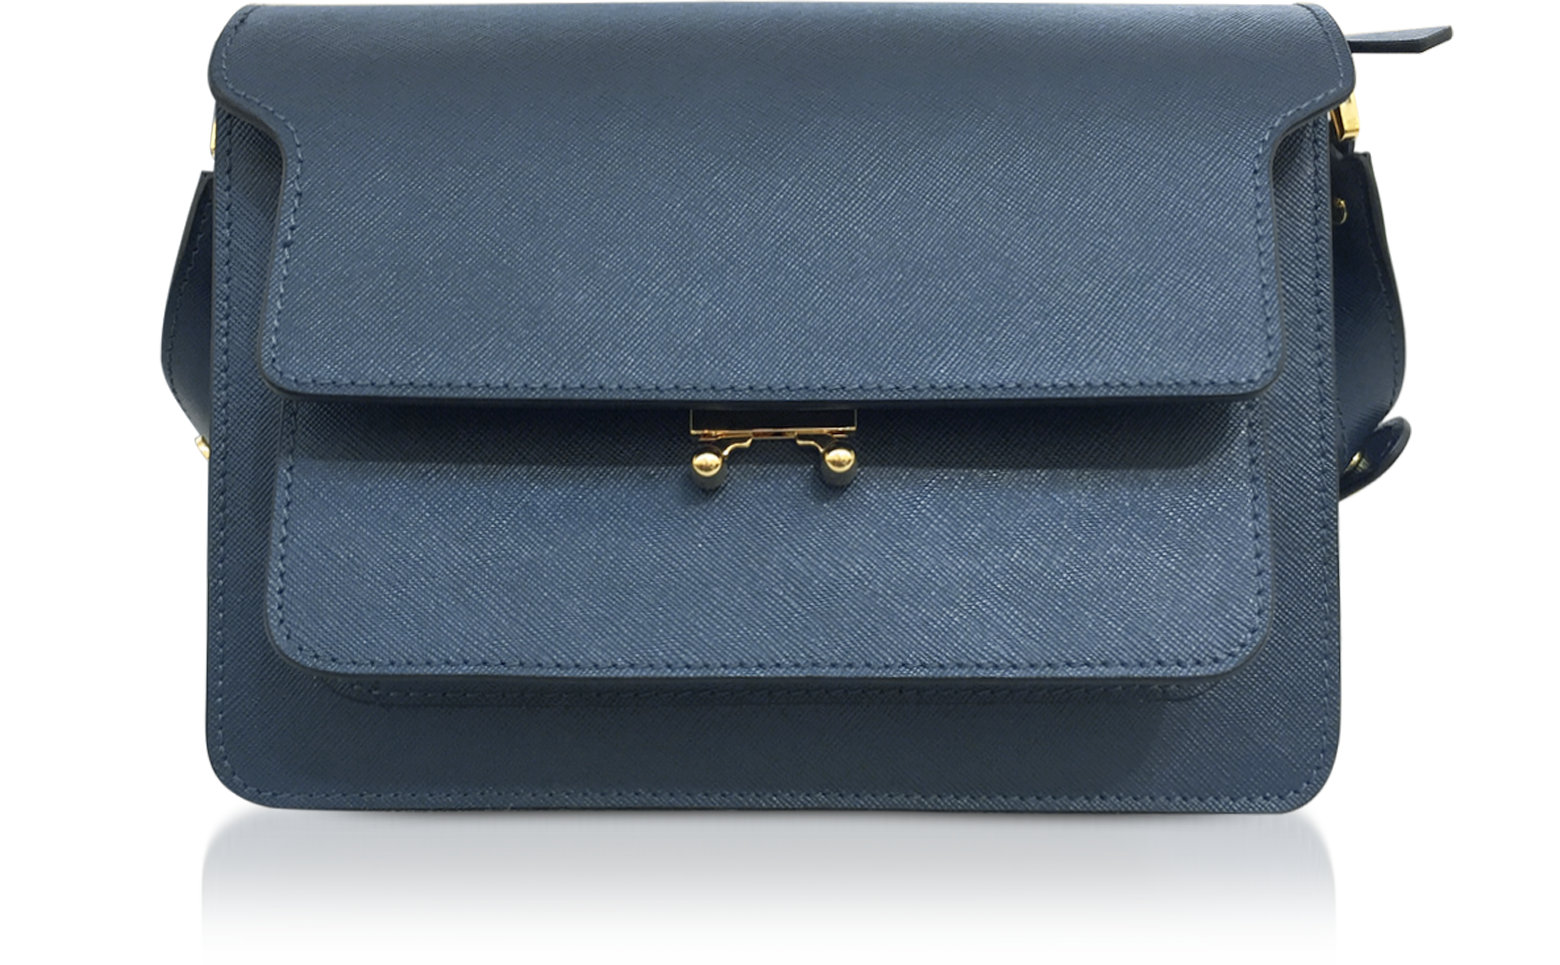 Marni Color Block Powder and Navy Blue Saffiano Leather Trunk Bag